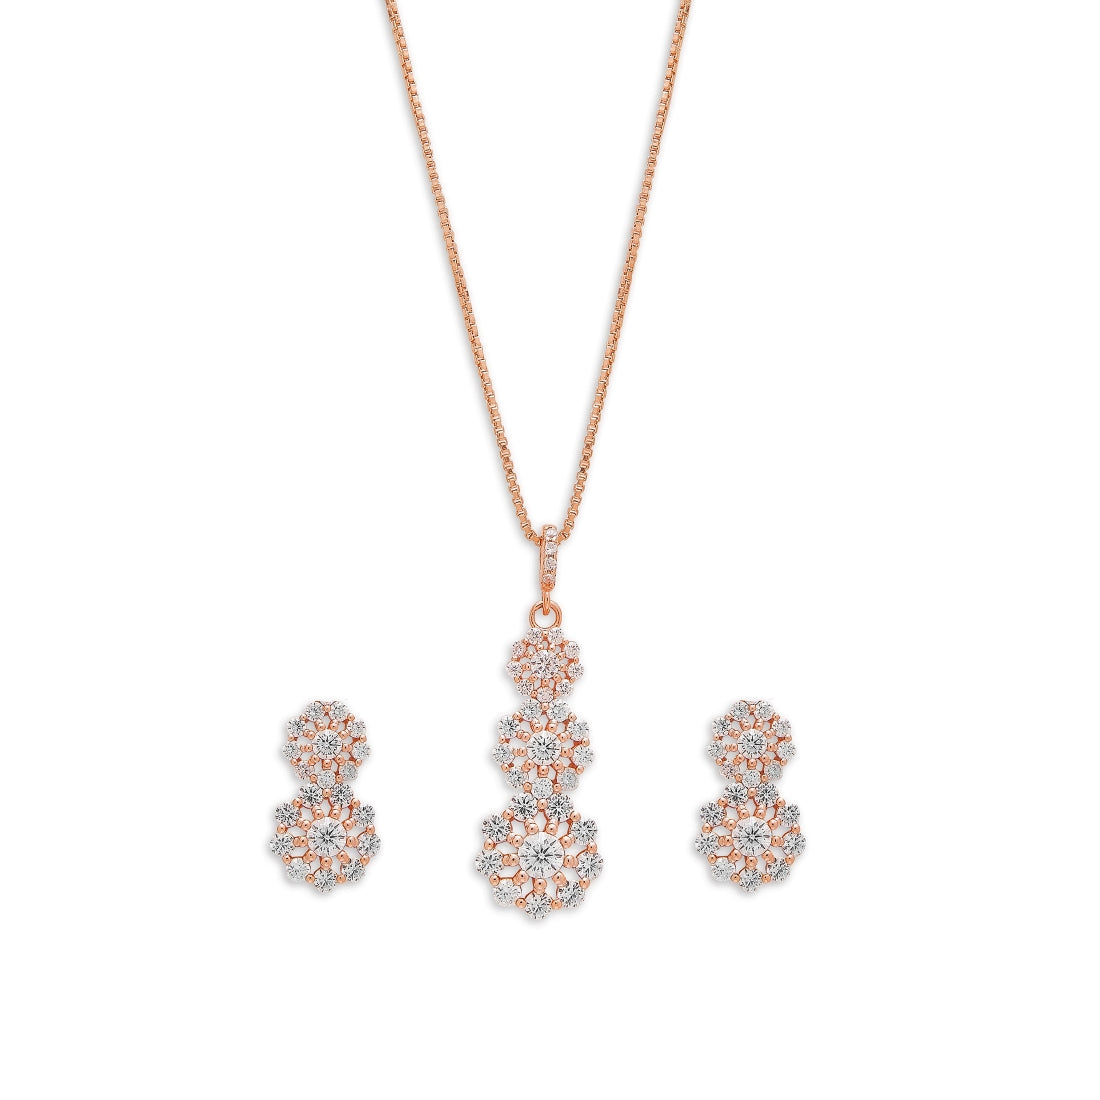 Blooming Beauty 925 Sterling Silver Rose gold Plated Jewelry Set